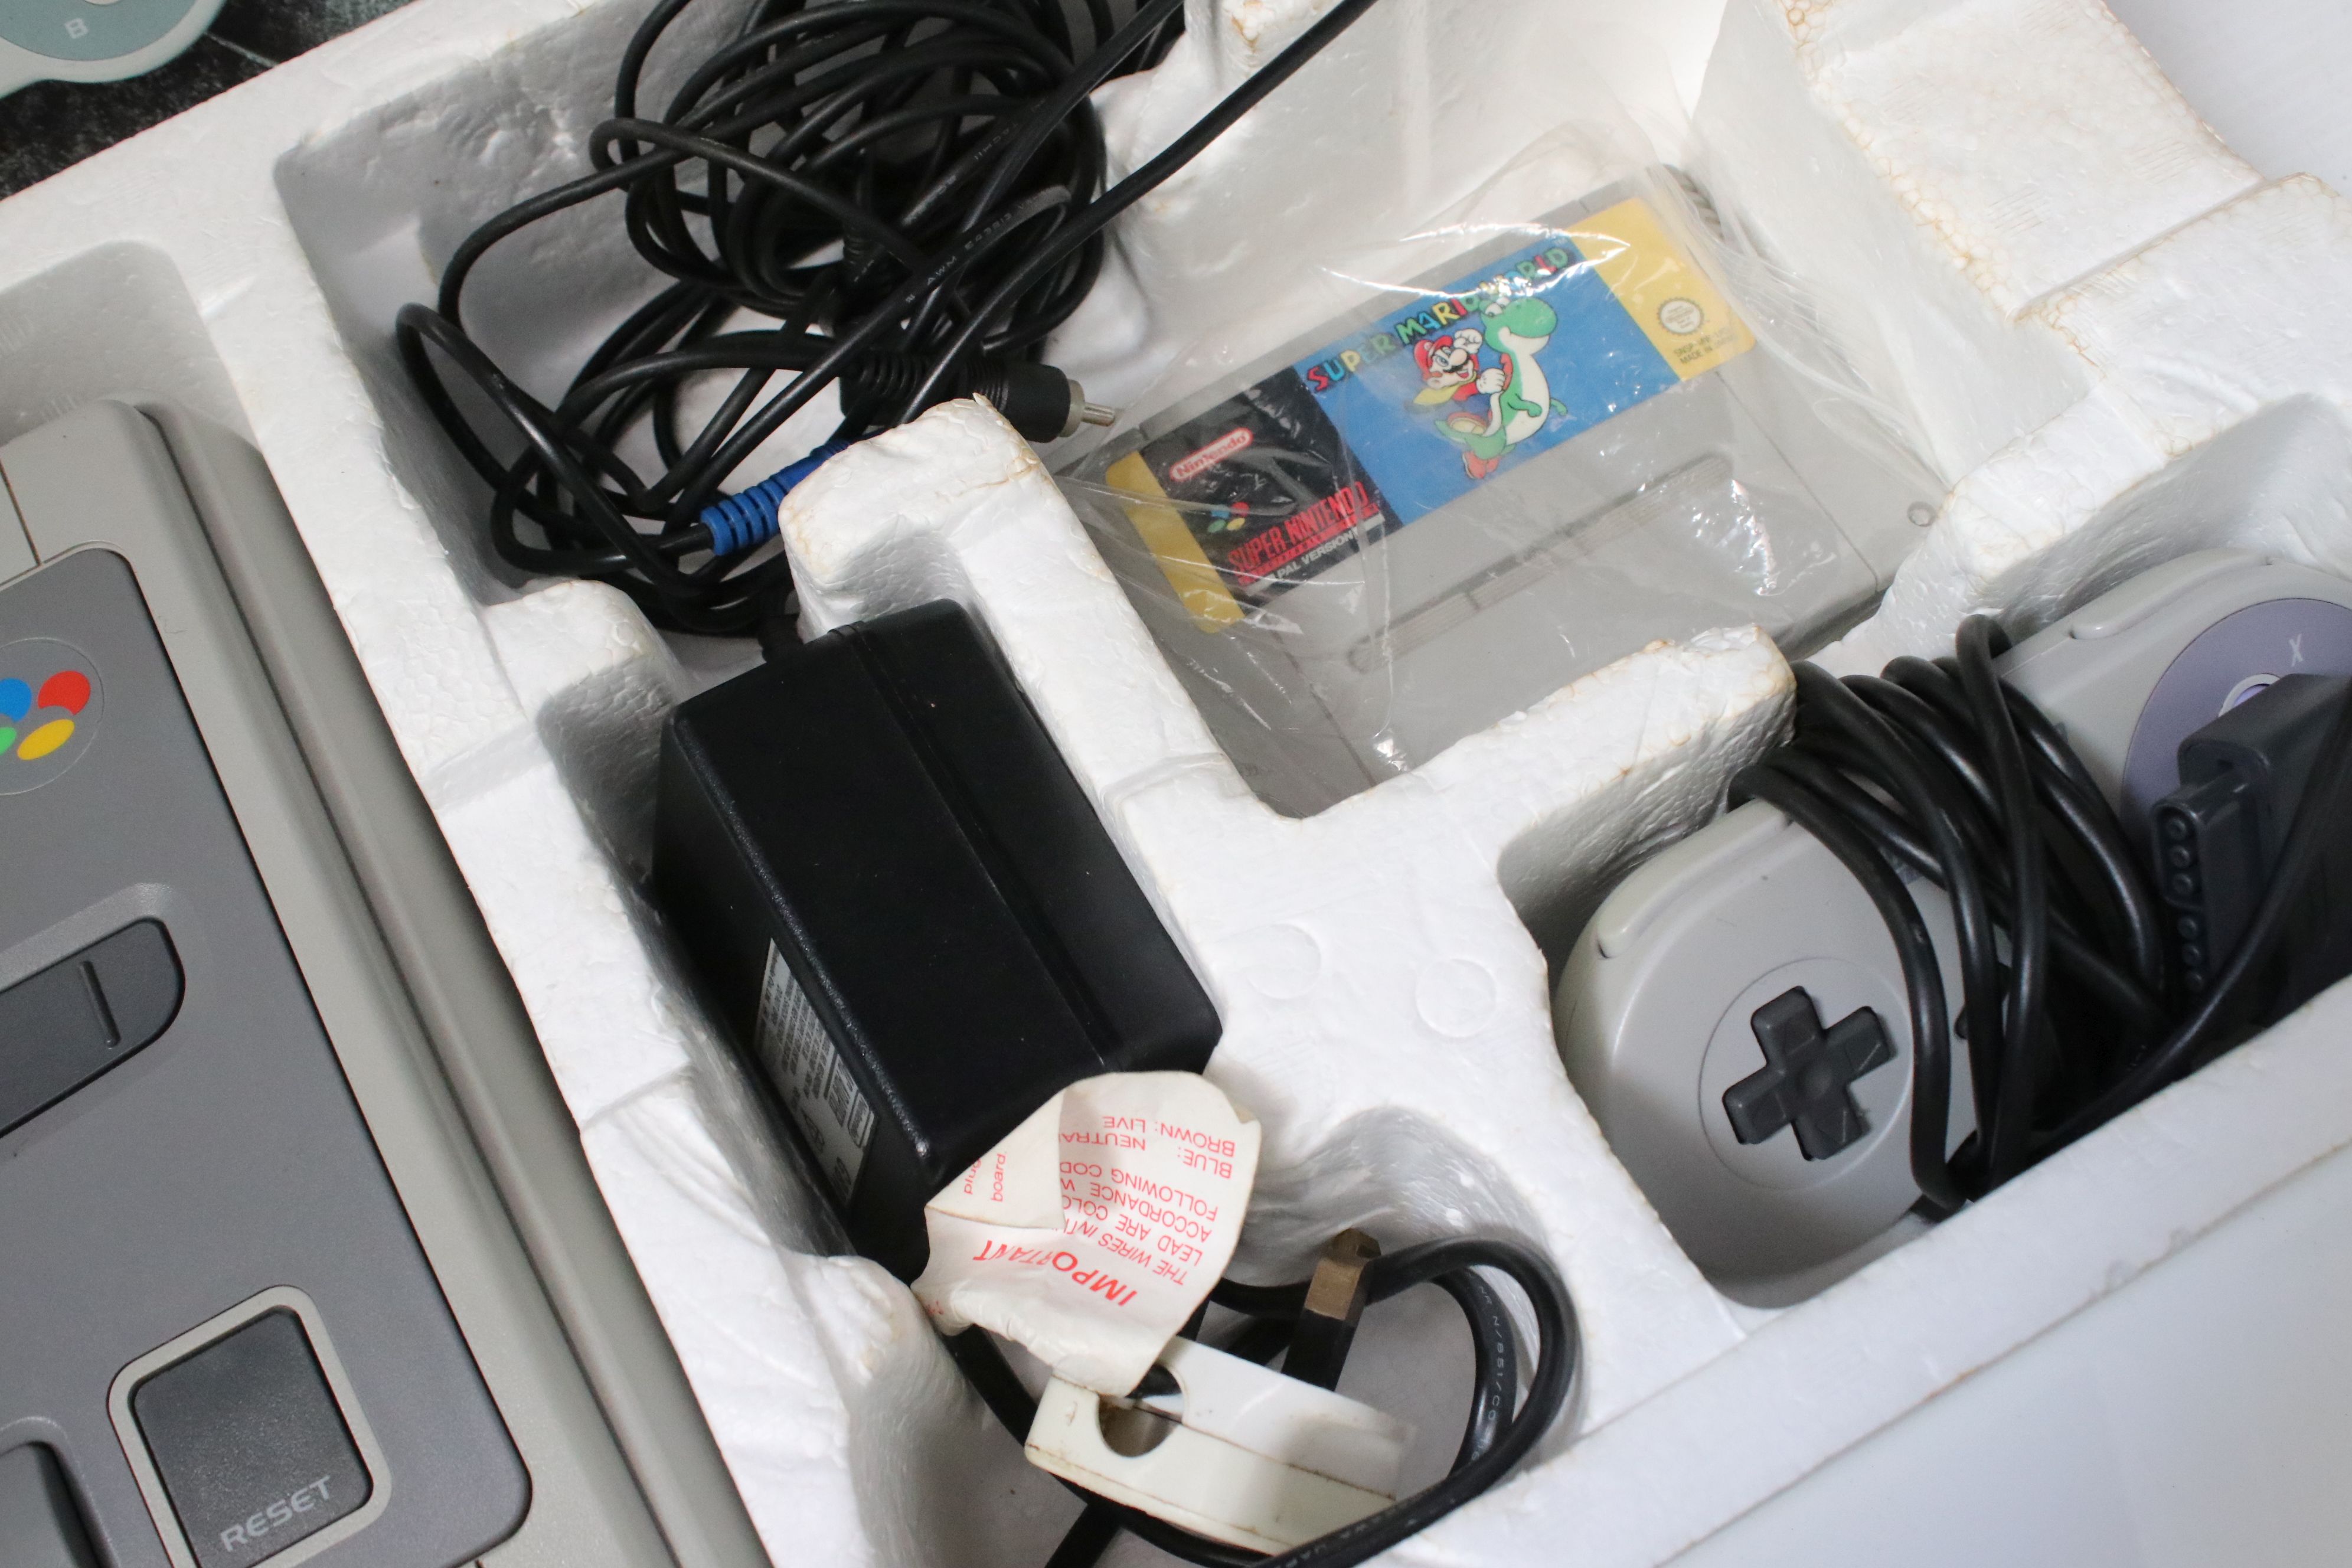 Retro Gaming - Boxed Super Nintendo SNES console with one controller and Super Mario World cartridge - Image 9 of 10